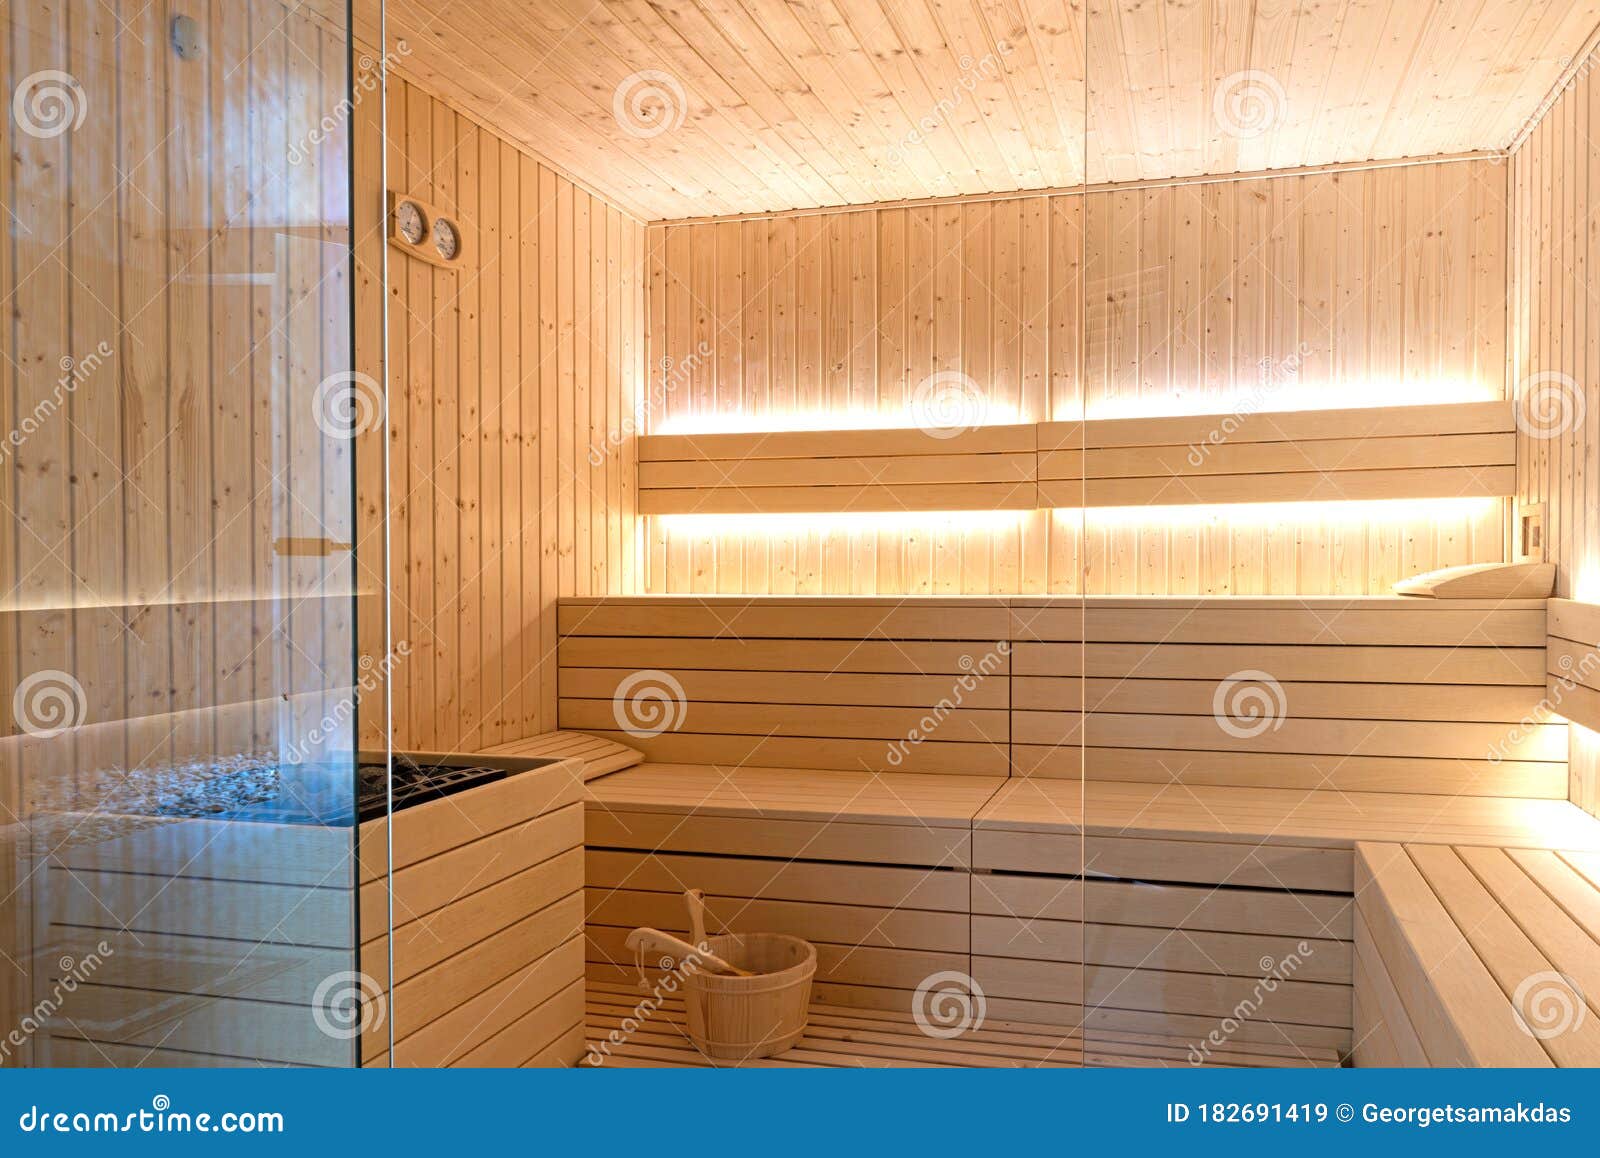 Empty Interior of Traditional Finnish Sauna Room. Modern Wooden Spa Therapy  Cabin with Hot Dry Steam Stock Image - Image of light, hotel: 182691419